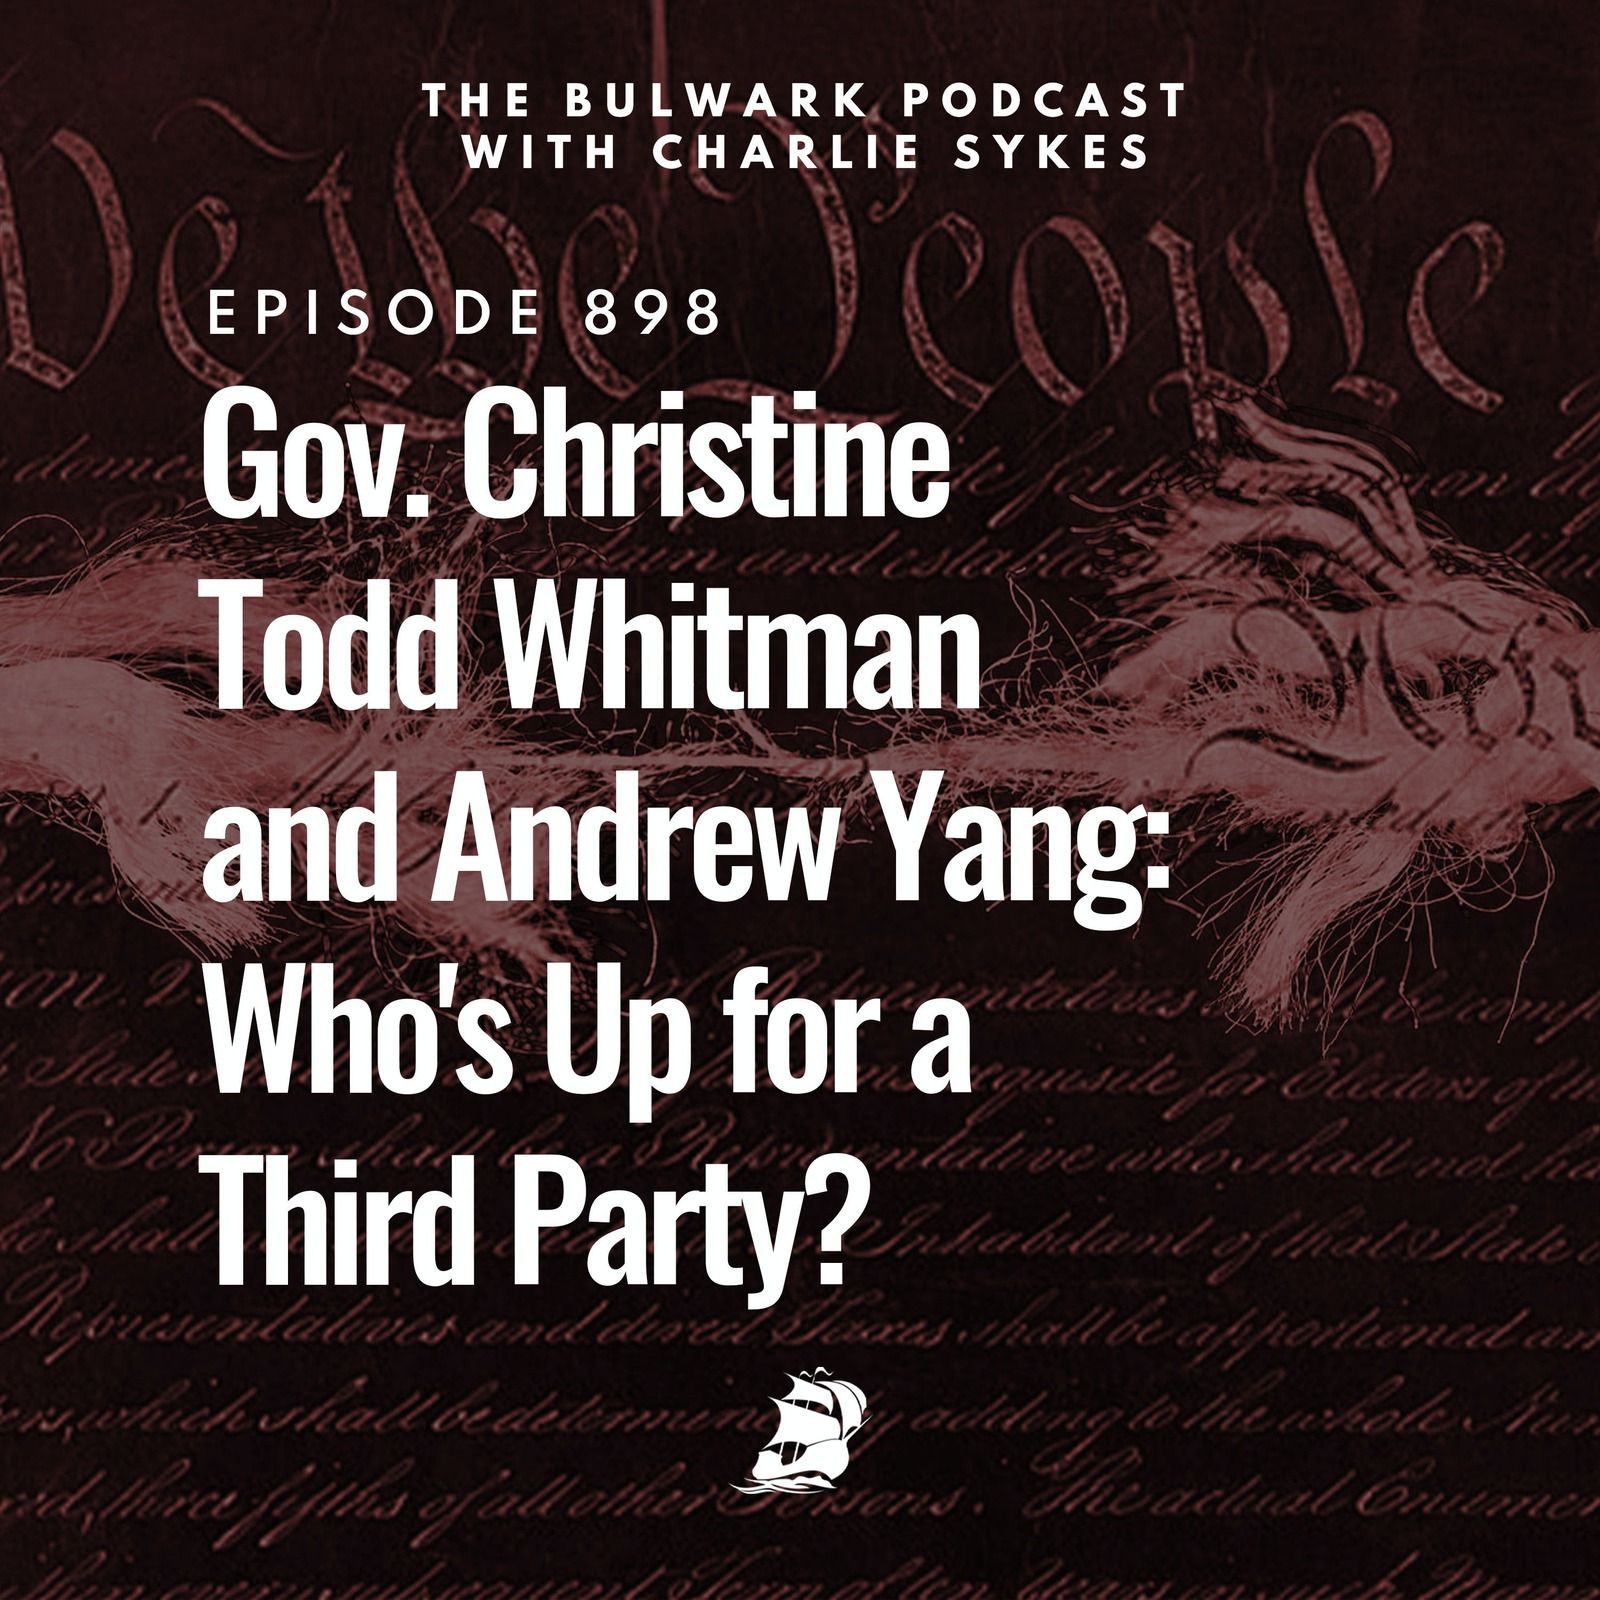 Gov. Christine Todd Whitman and Andrew Yang: Who's up for a Third Party? by The Bulwark Podcast